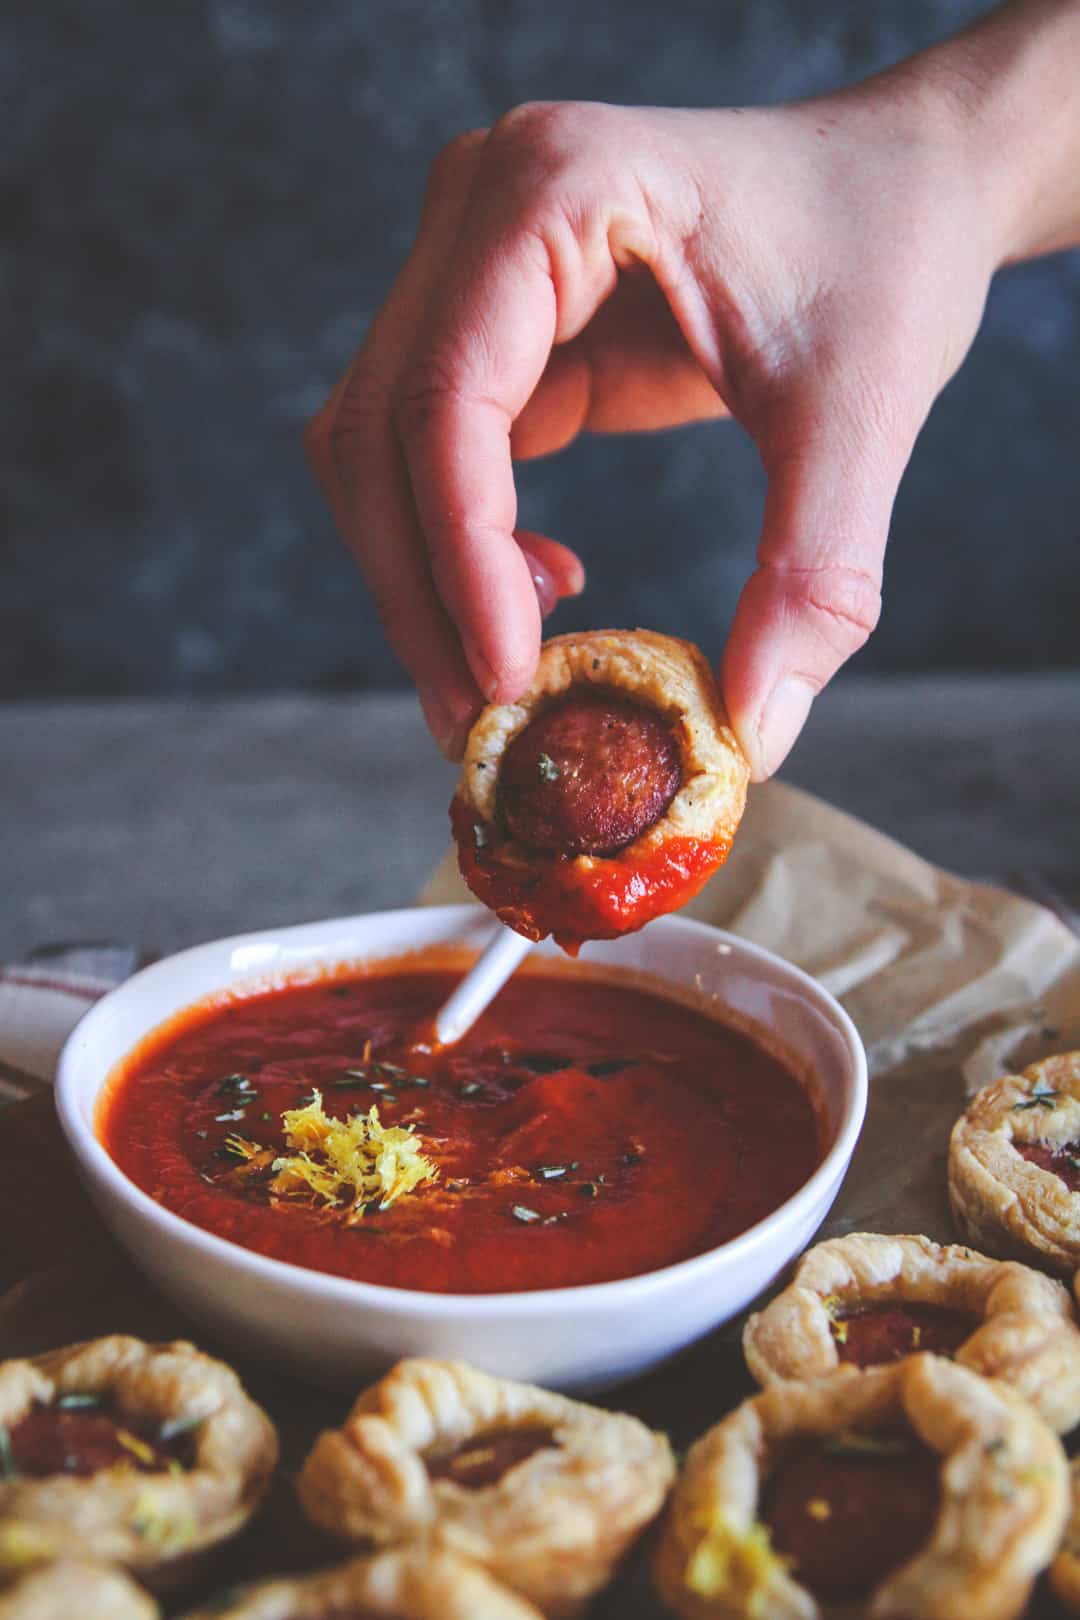 Dipping appetizer bite into sauce